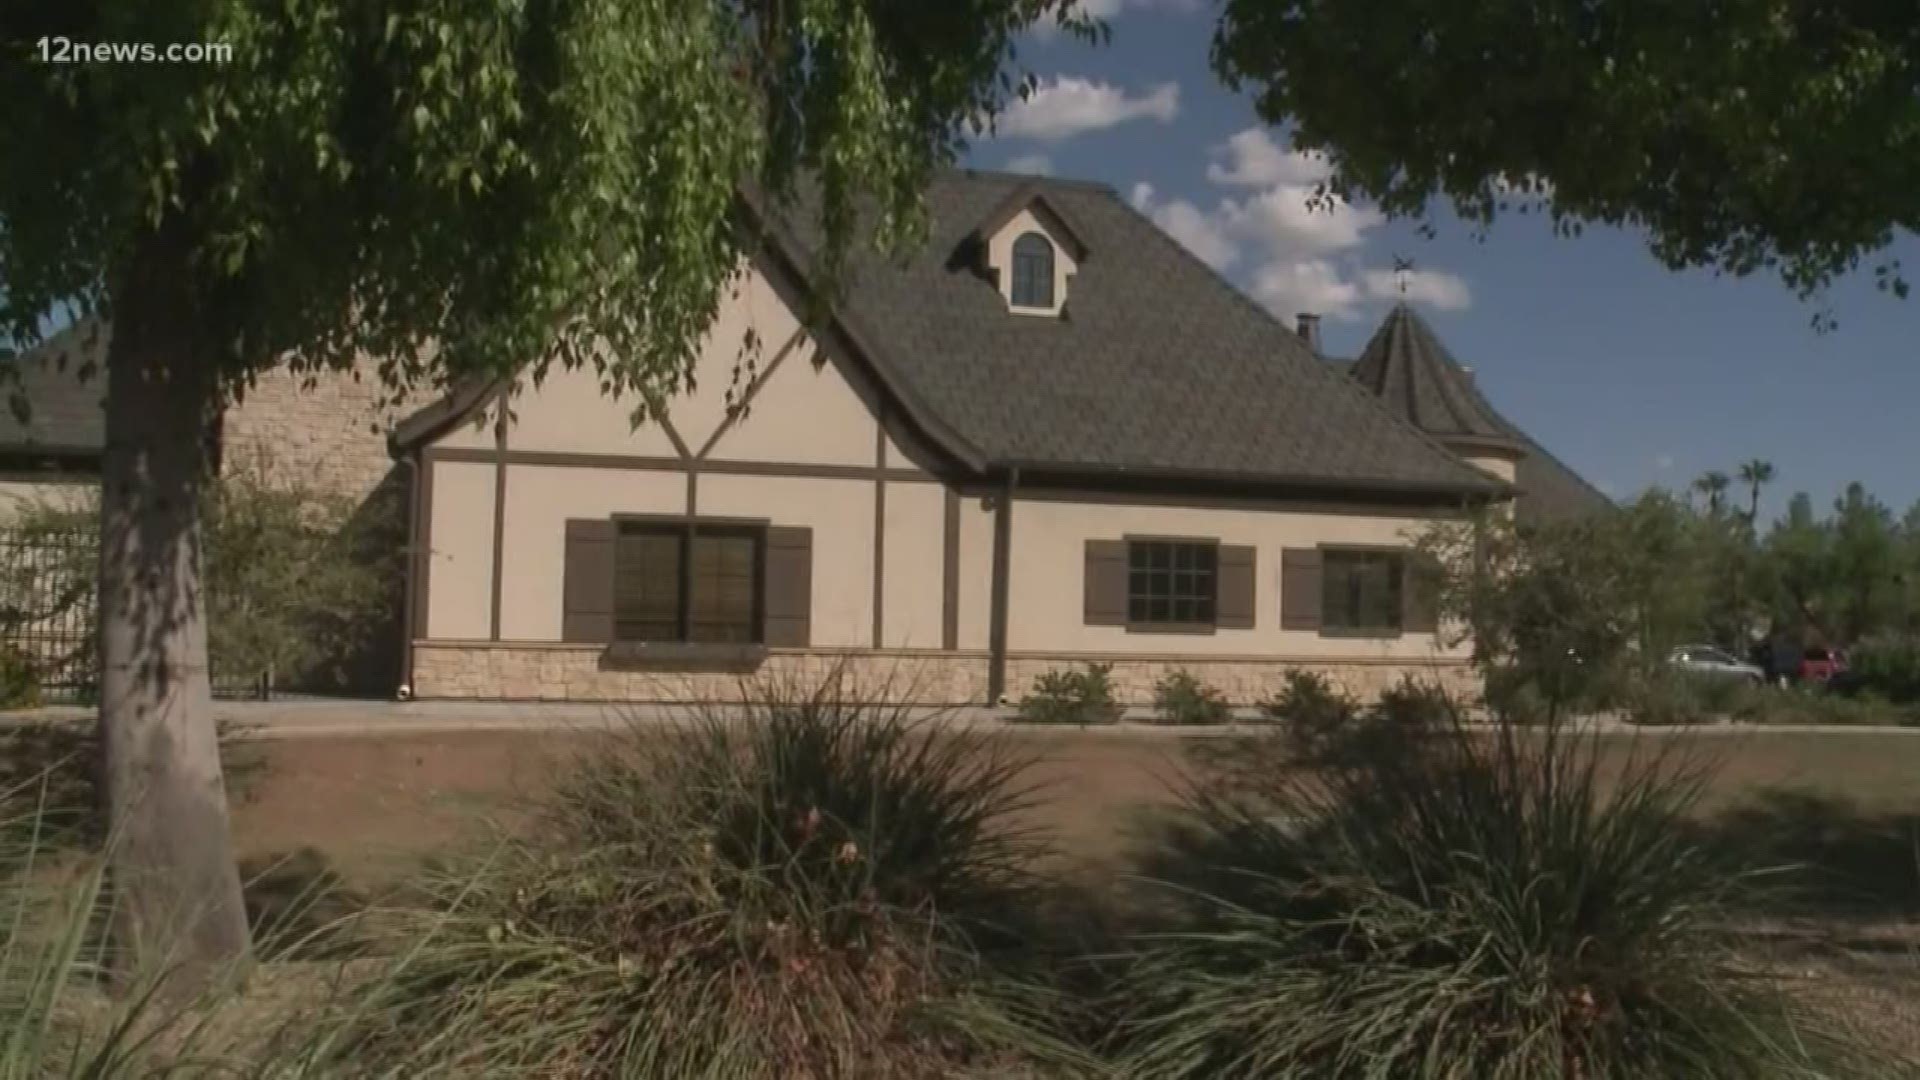 The Gilbert Police Department said a gate at Little Sunshine's Playhouse and Preschool "failed," allowing seven preschoolers to wander away from the school.